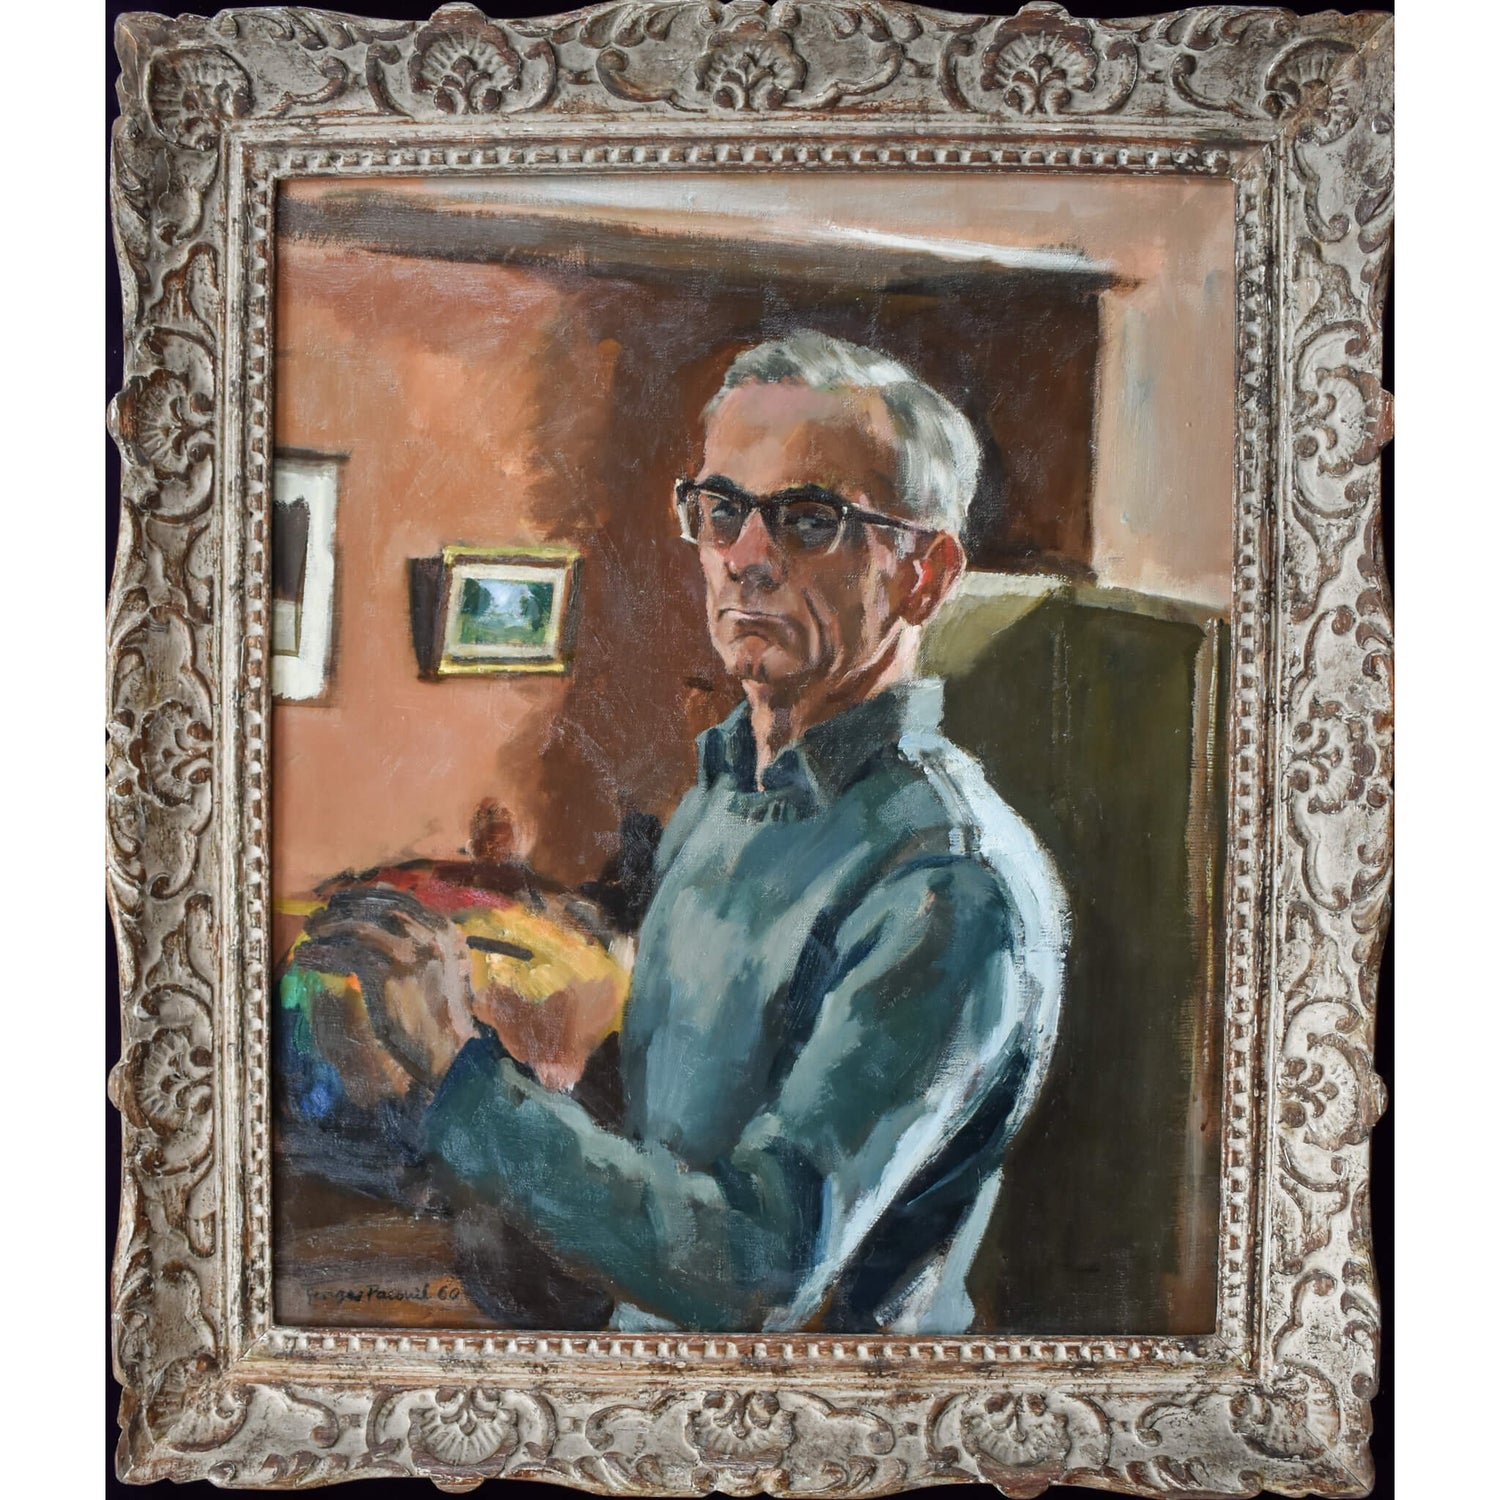 Original self-portrait oil painting by the post-impressionist painter Georges Pacouil for sale at Winckelmann Gallery